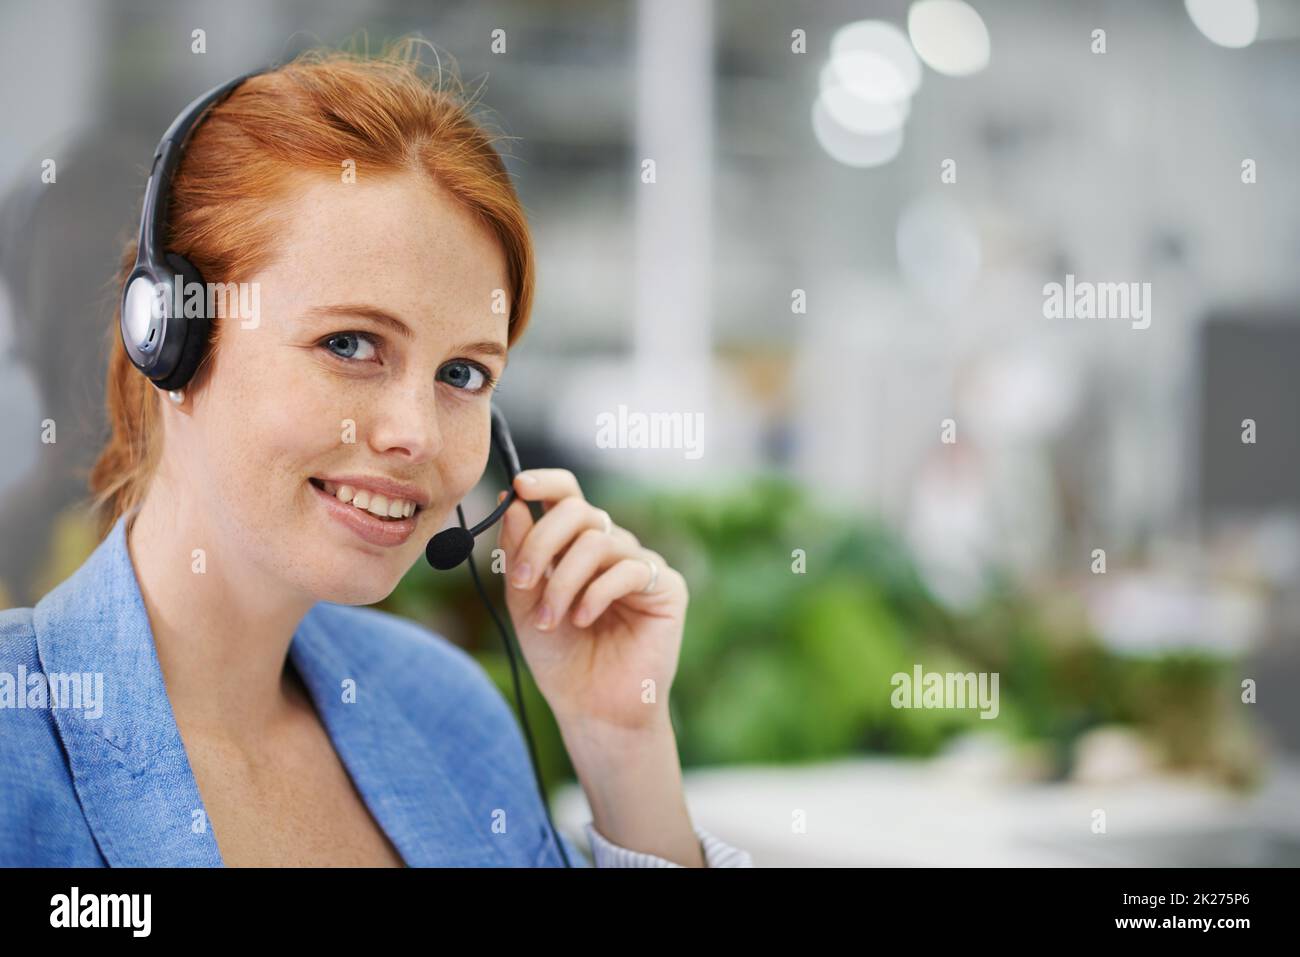 Assistance is a phone call away. Shot of an attractive red headed female wearing head sets in an office setting. Stock Photo